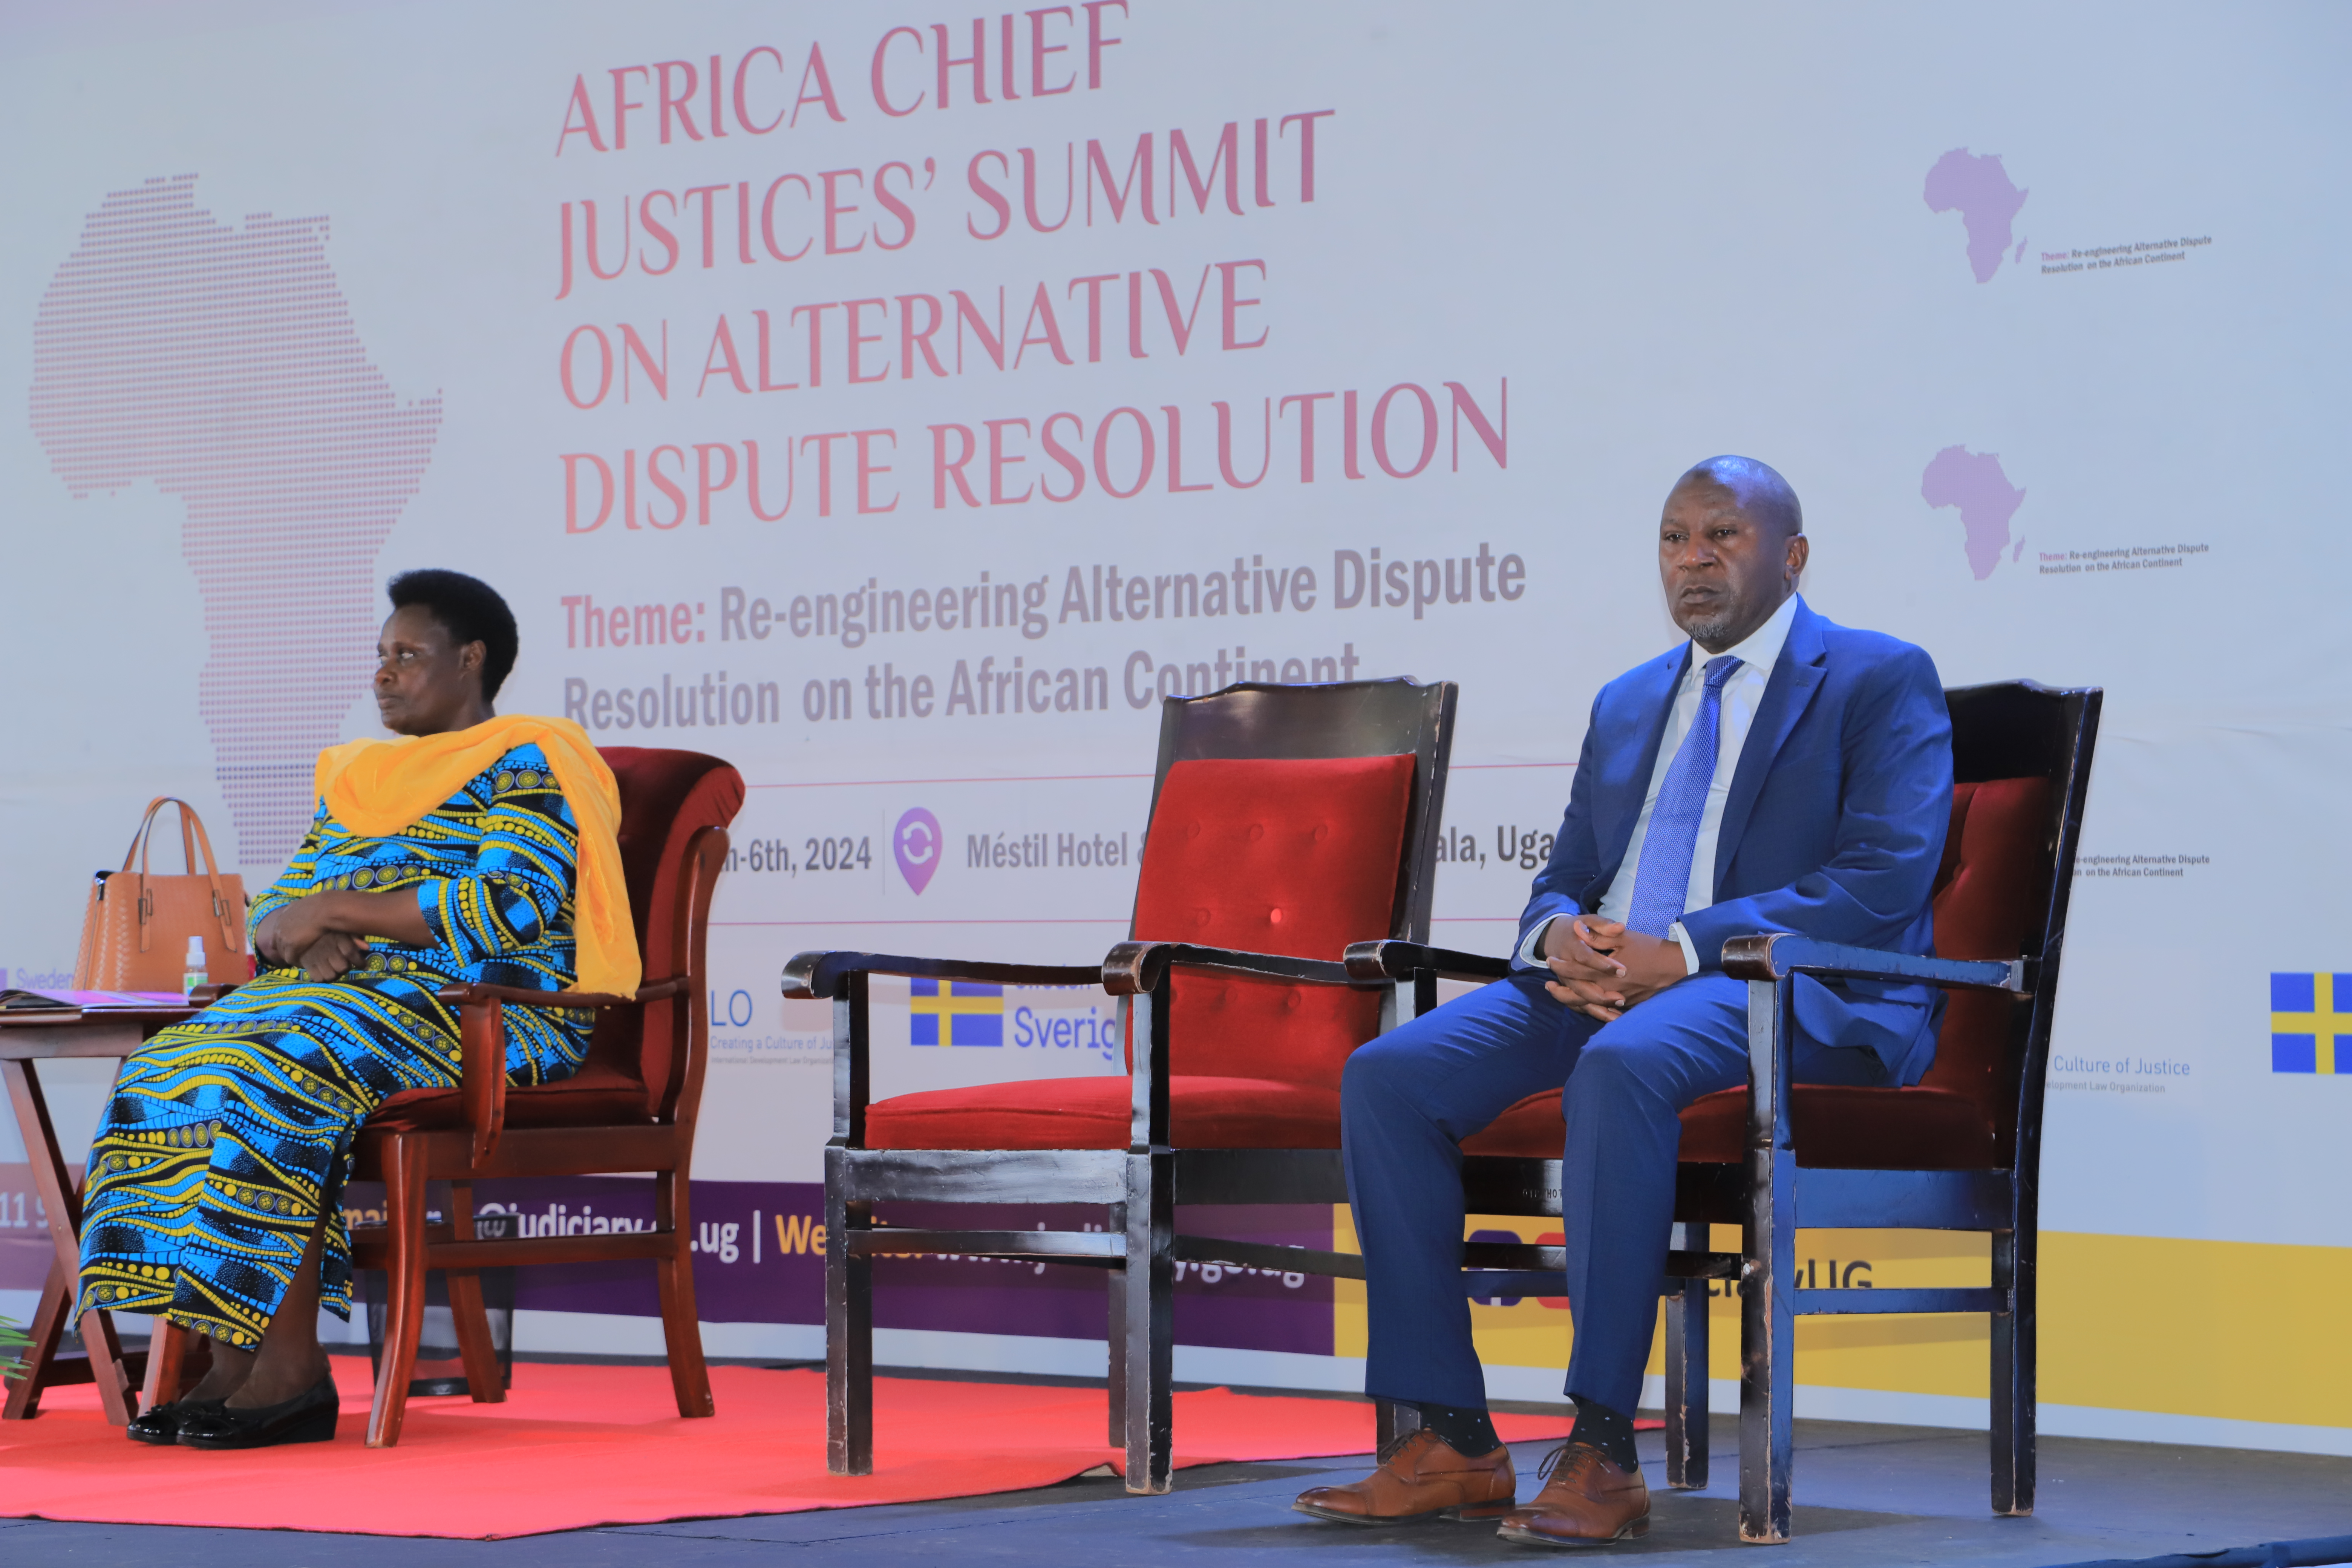 The African Chief Justices' Summit on Alternative Dispute Resolution